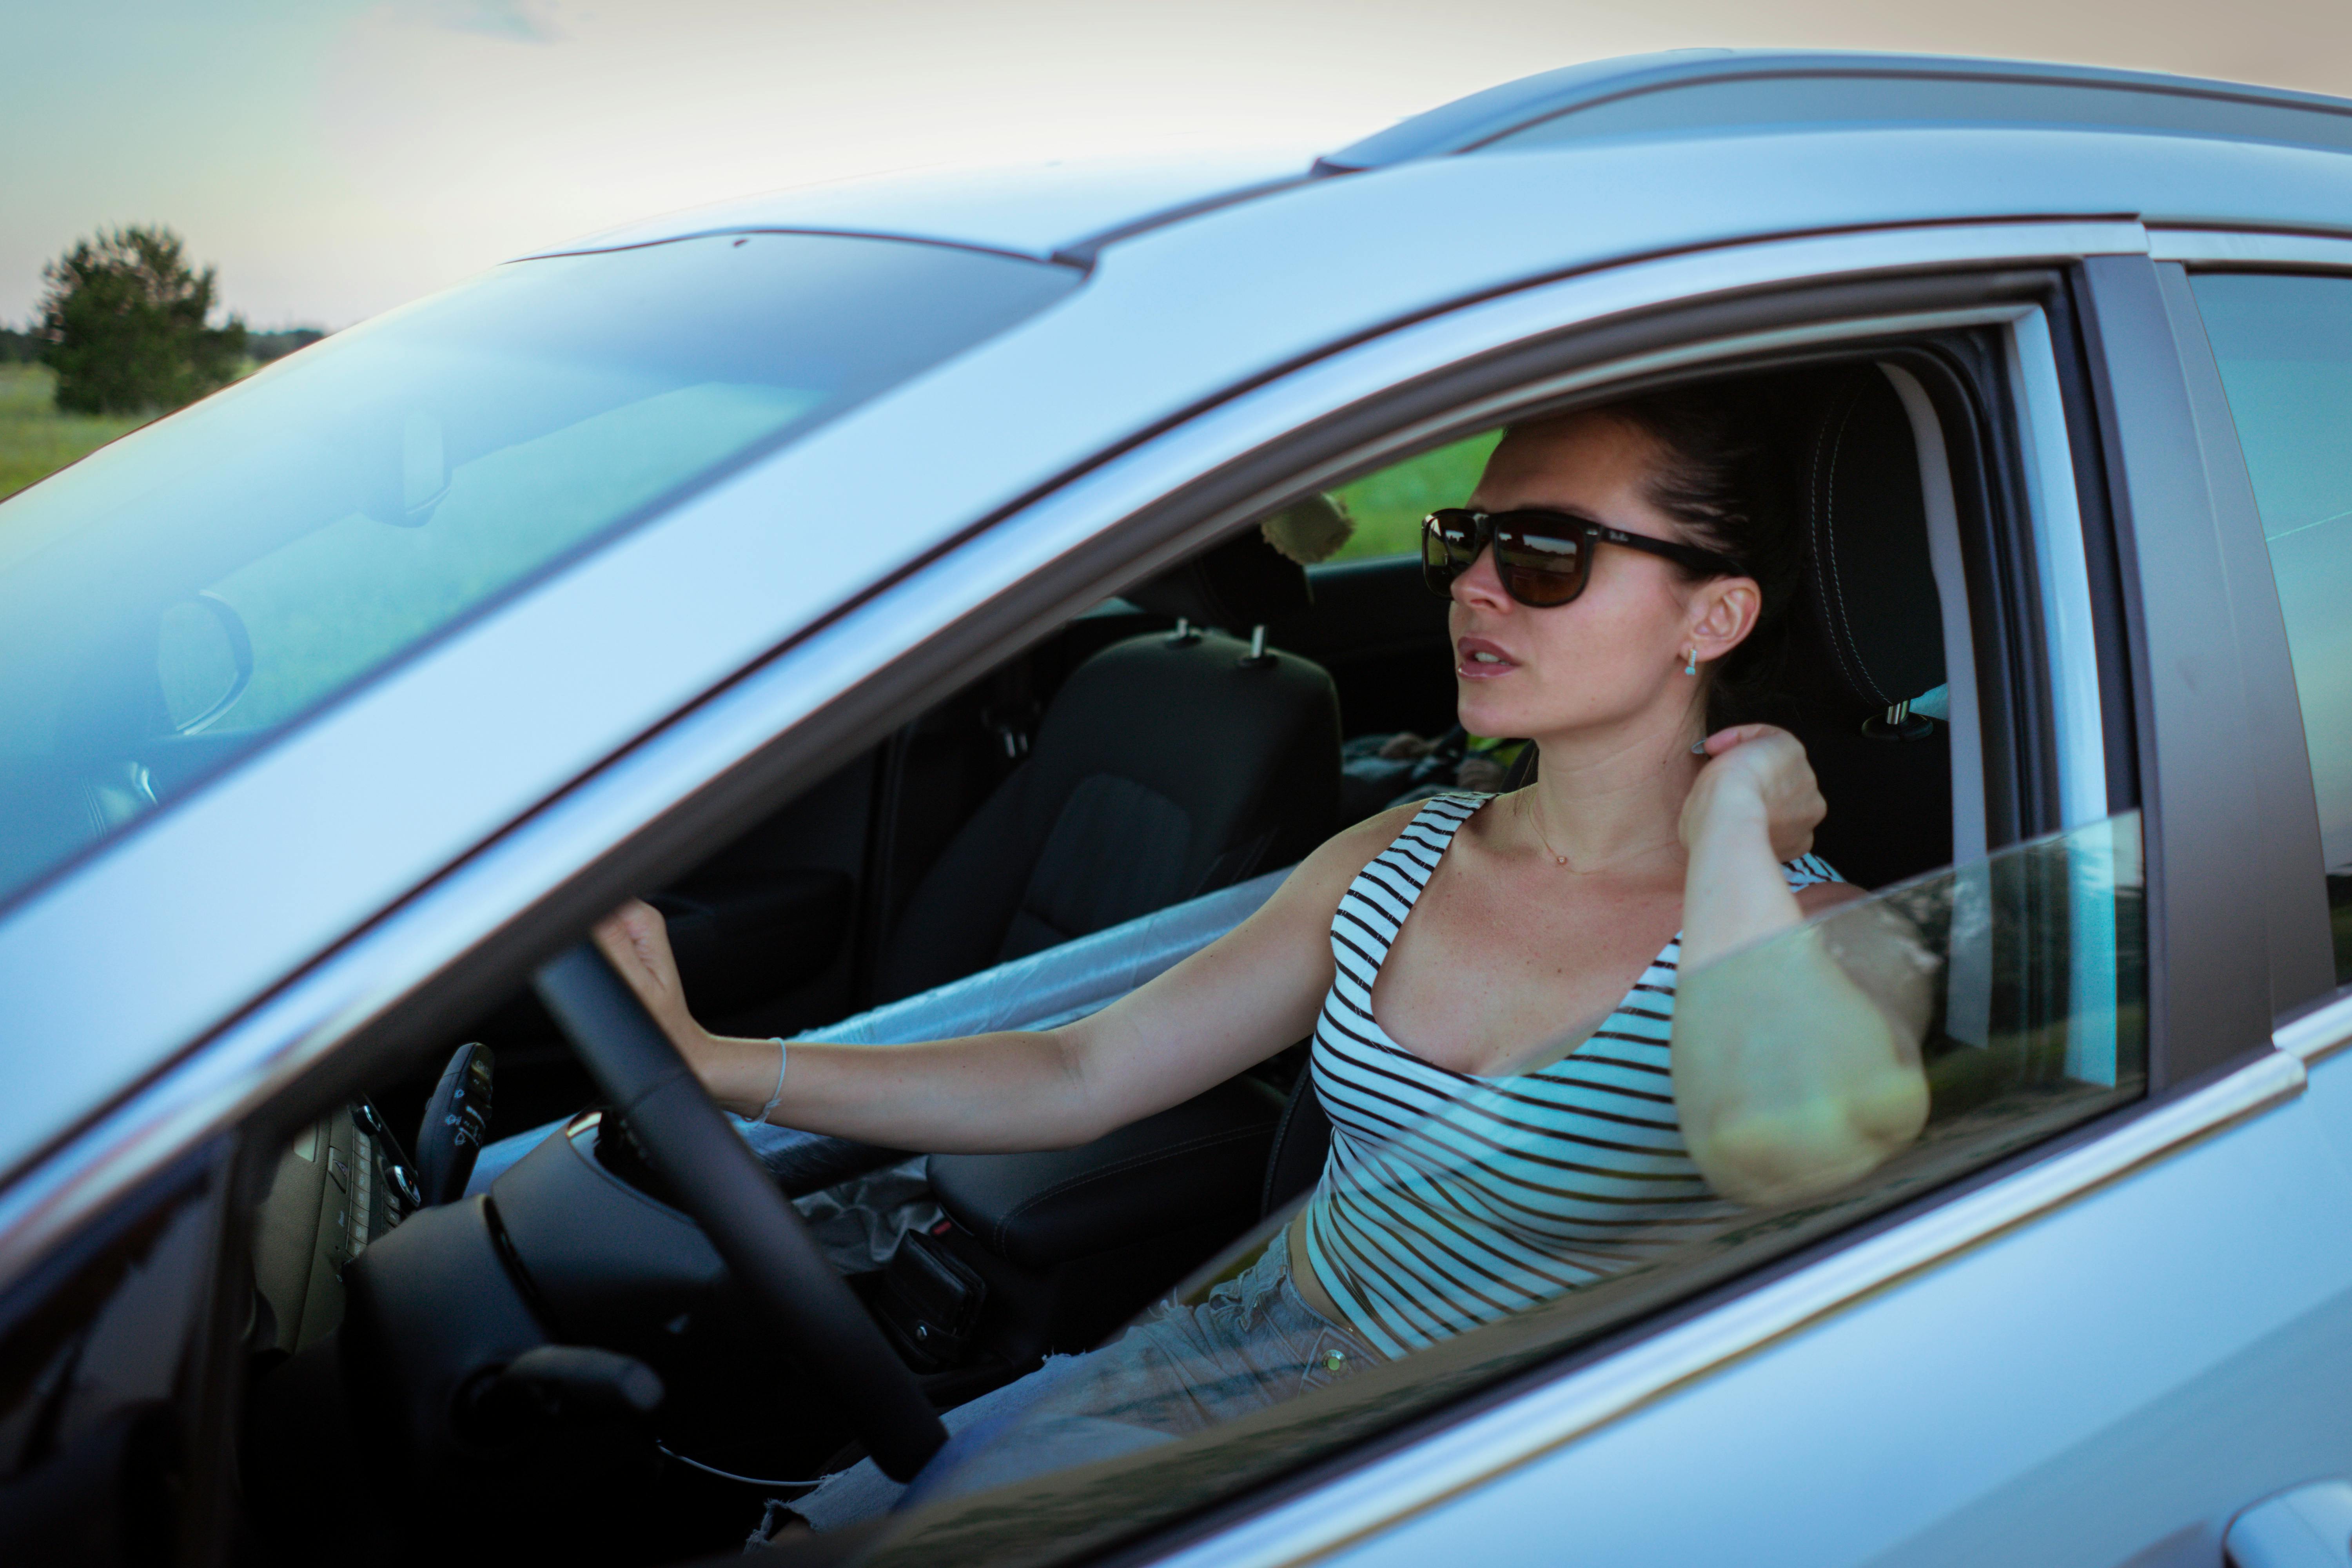 A woman driving while wearing sunglasses | Source: Pexels